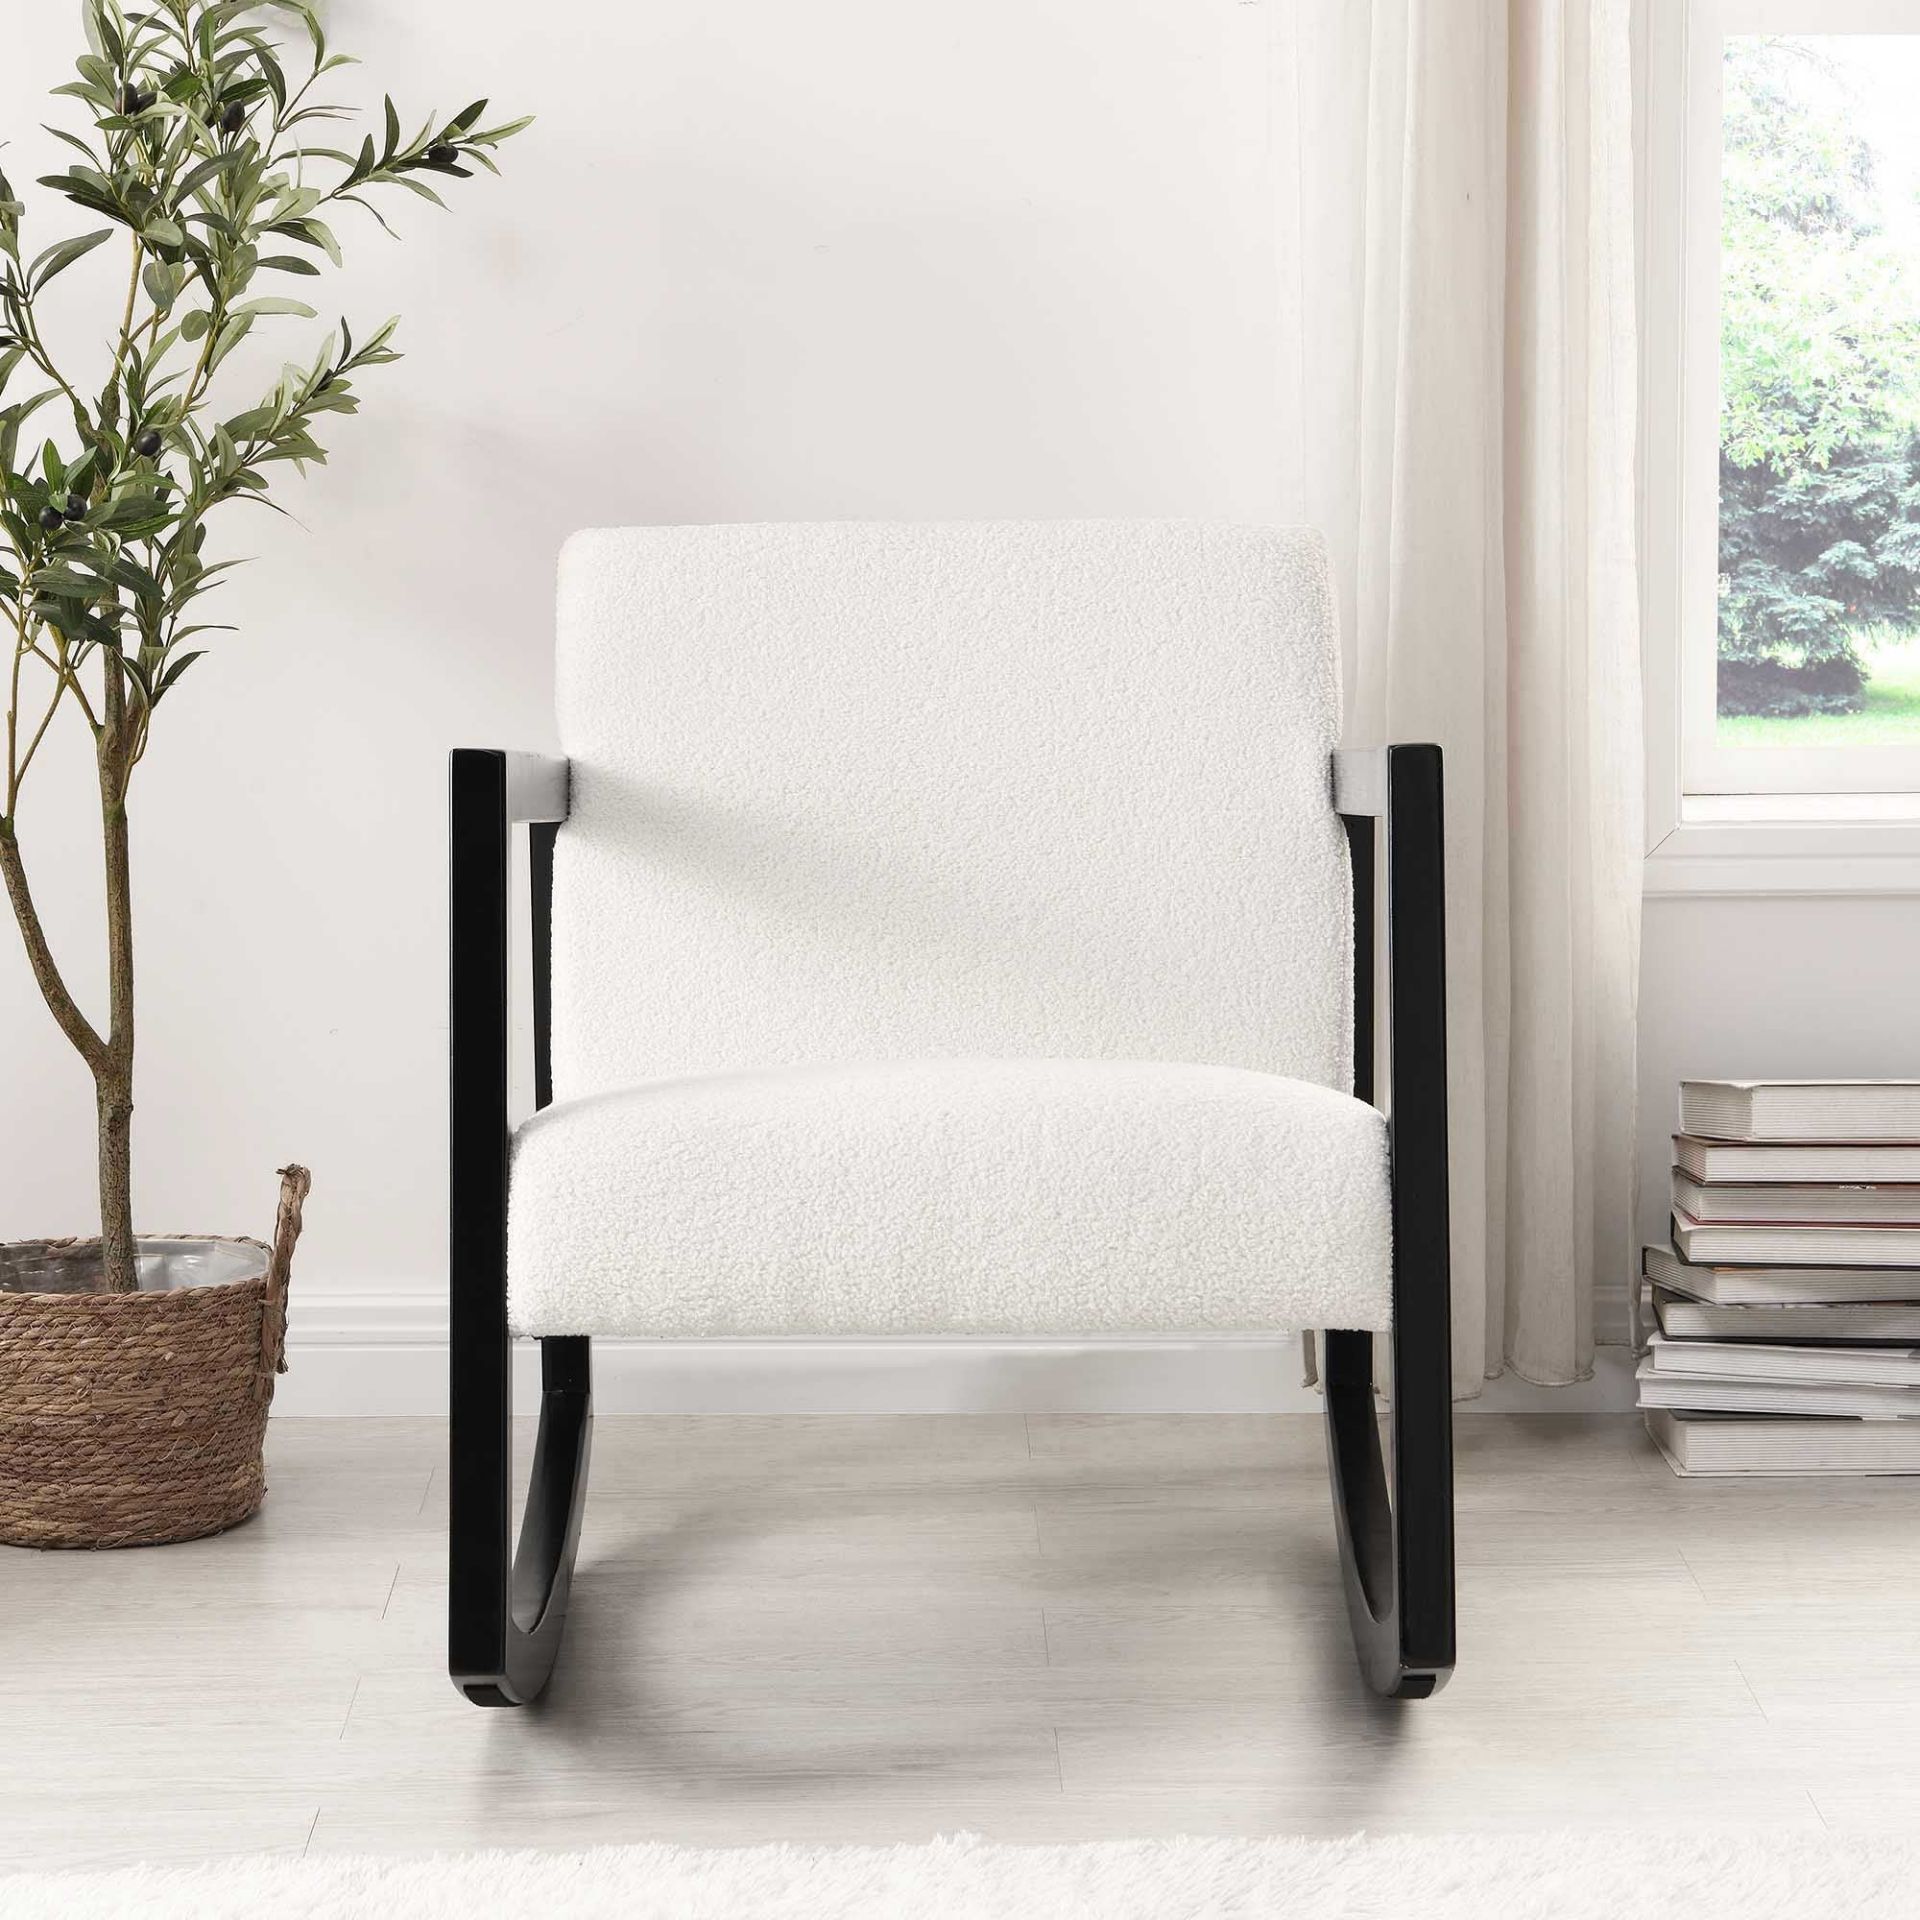 Fyne Ecru Boucle Rocking Armchair, Black Frame. - R19.1. RRP £249.99. Inspired by traditional